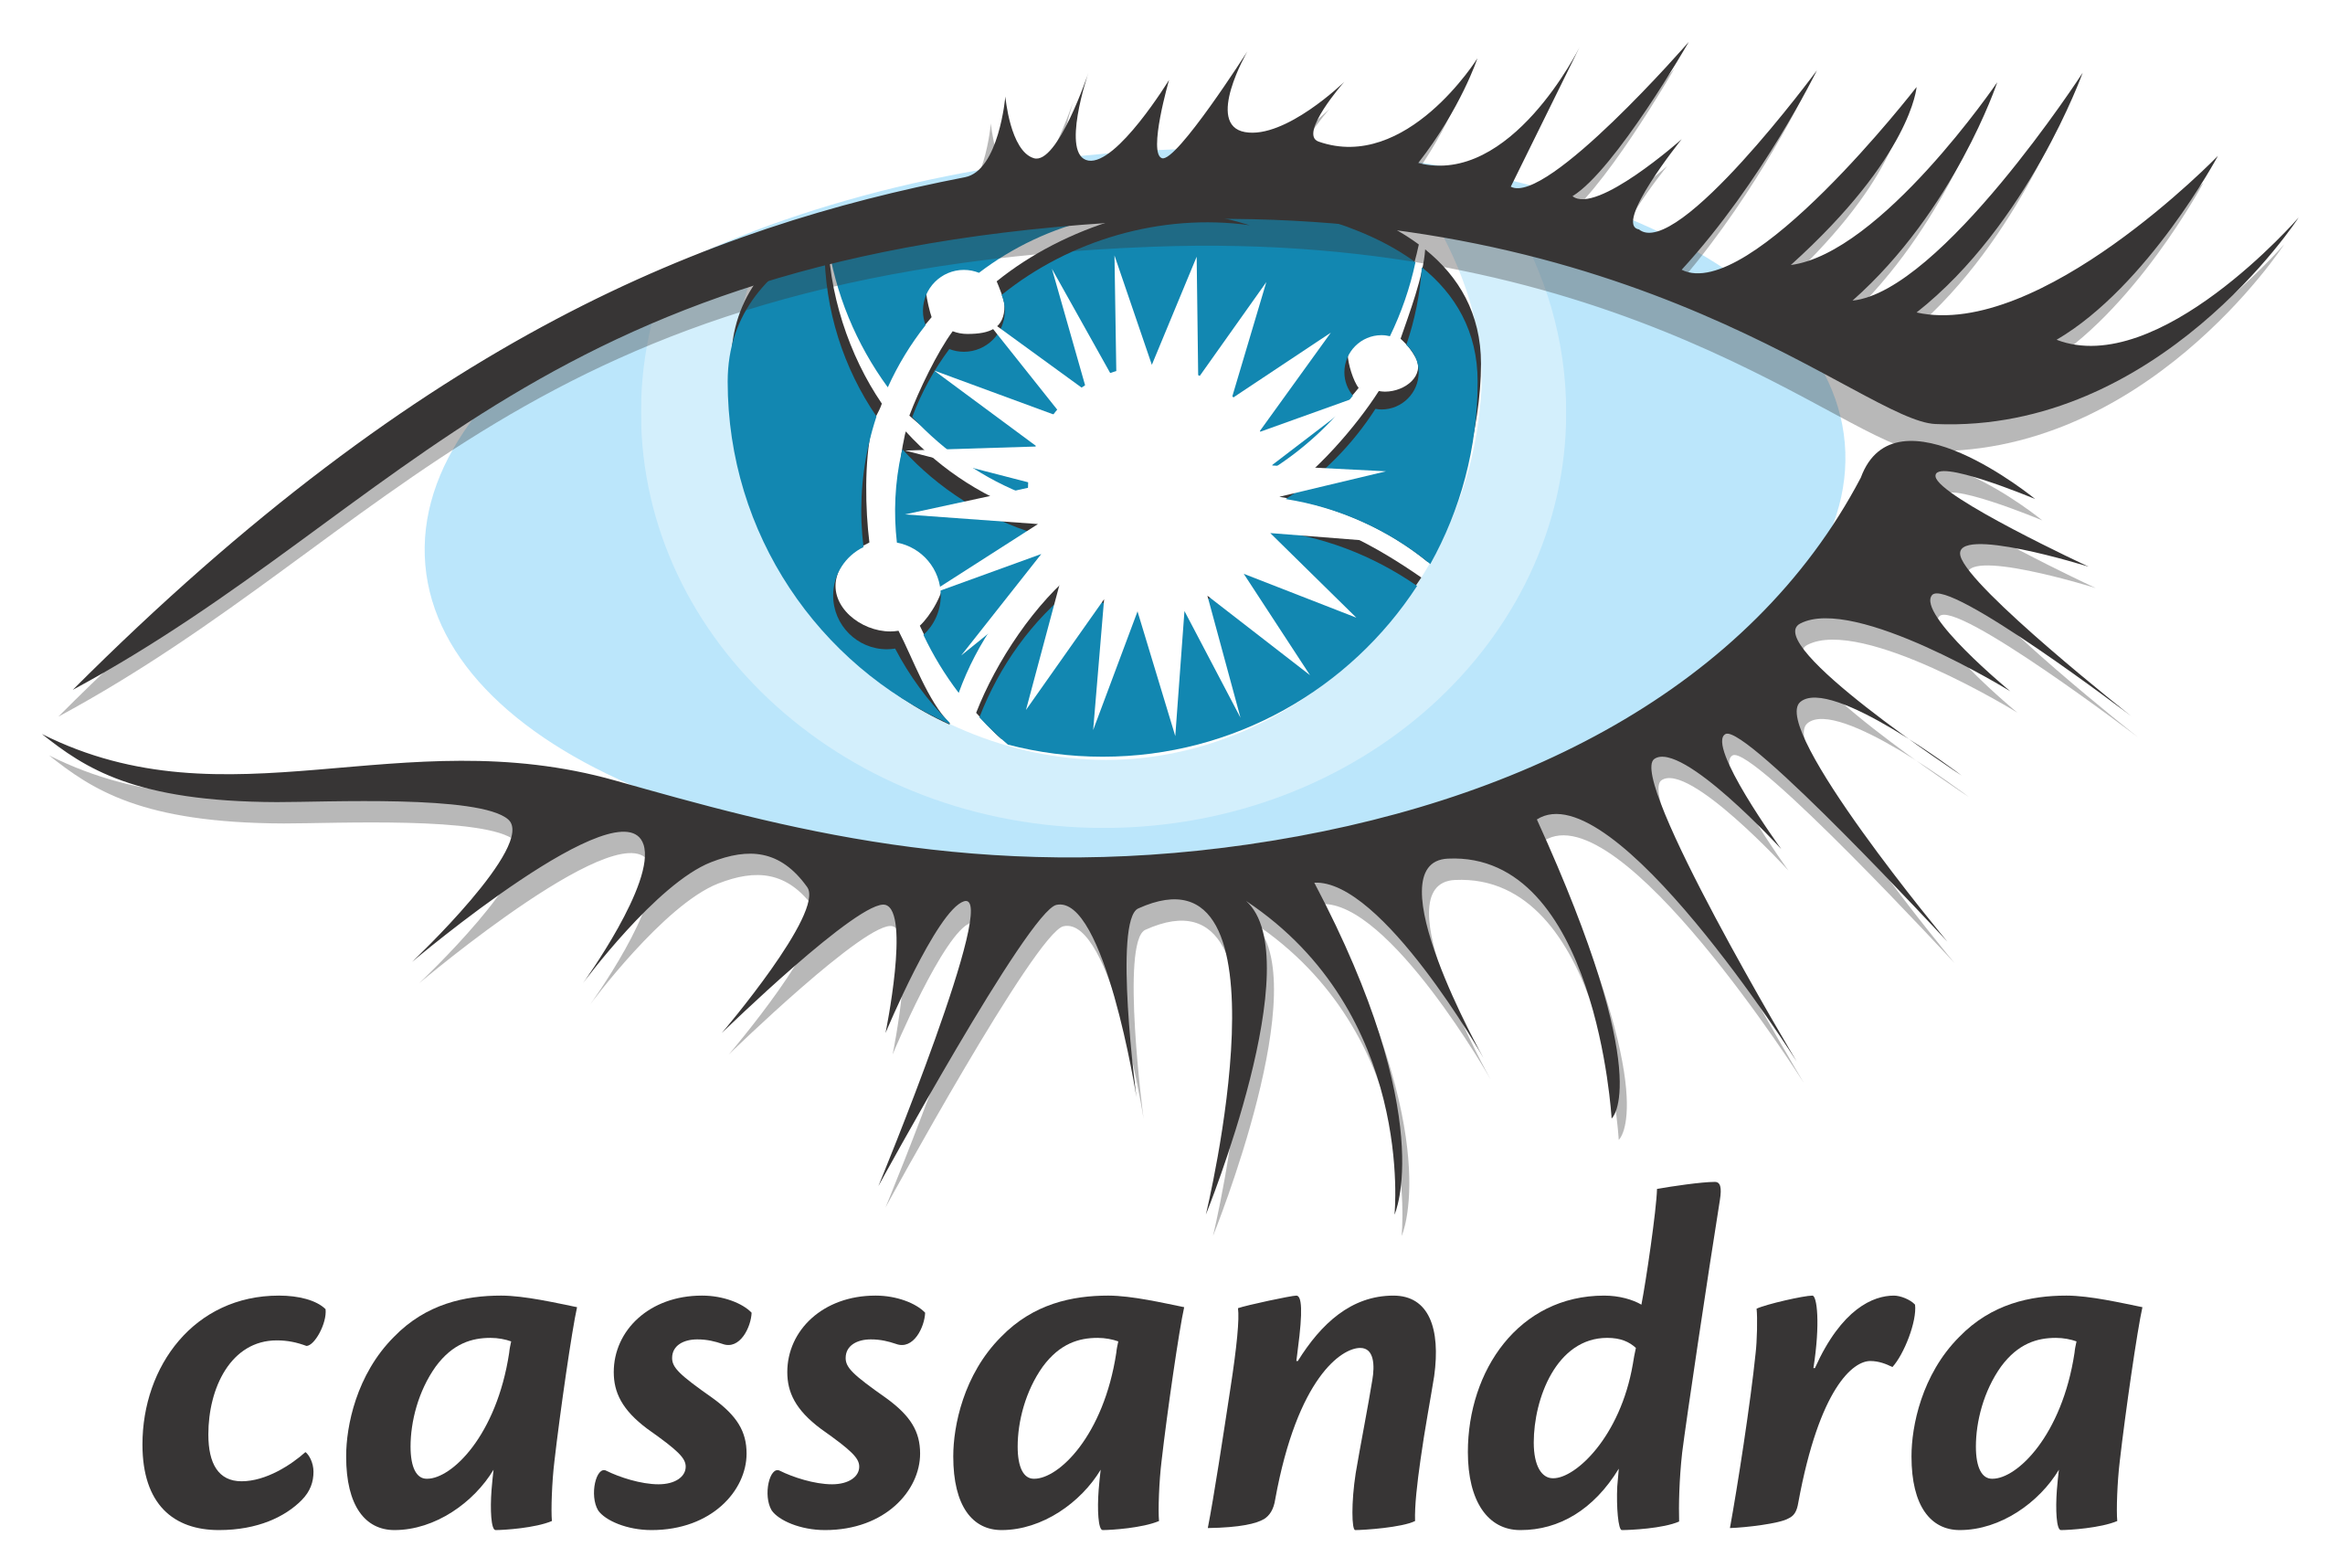 How to Install Cassandra on MX Linux - Featured